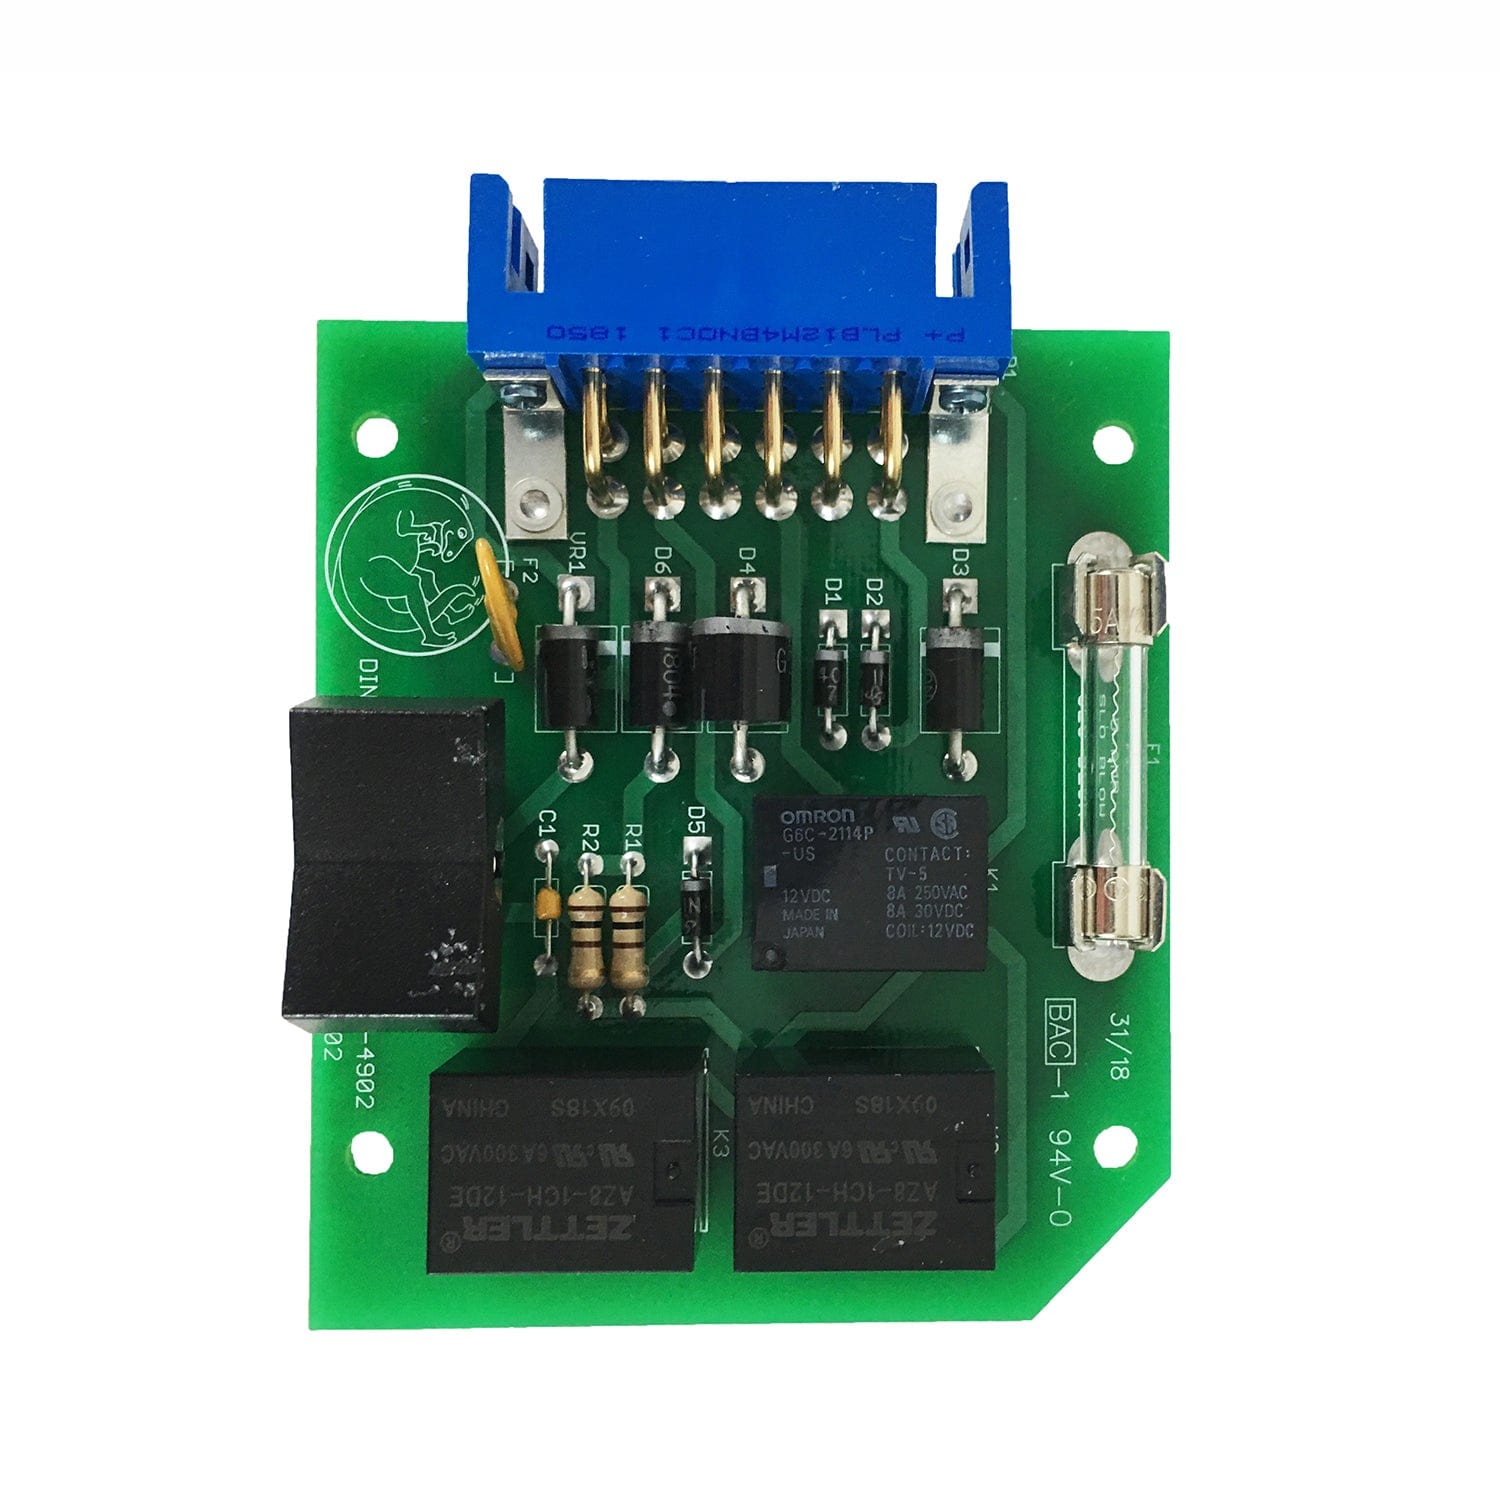 Key Fob Remote and Receiver PCB - Parallax